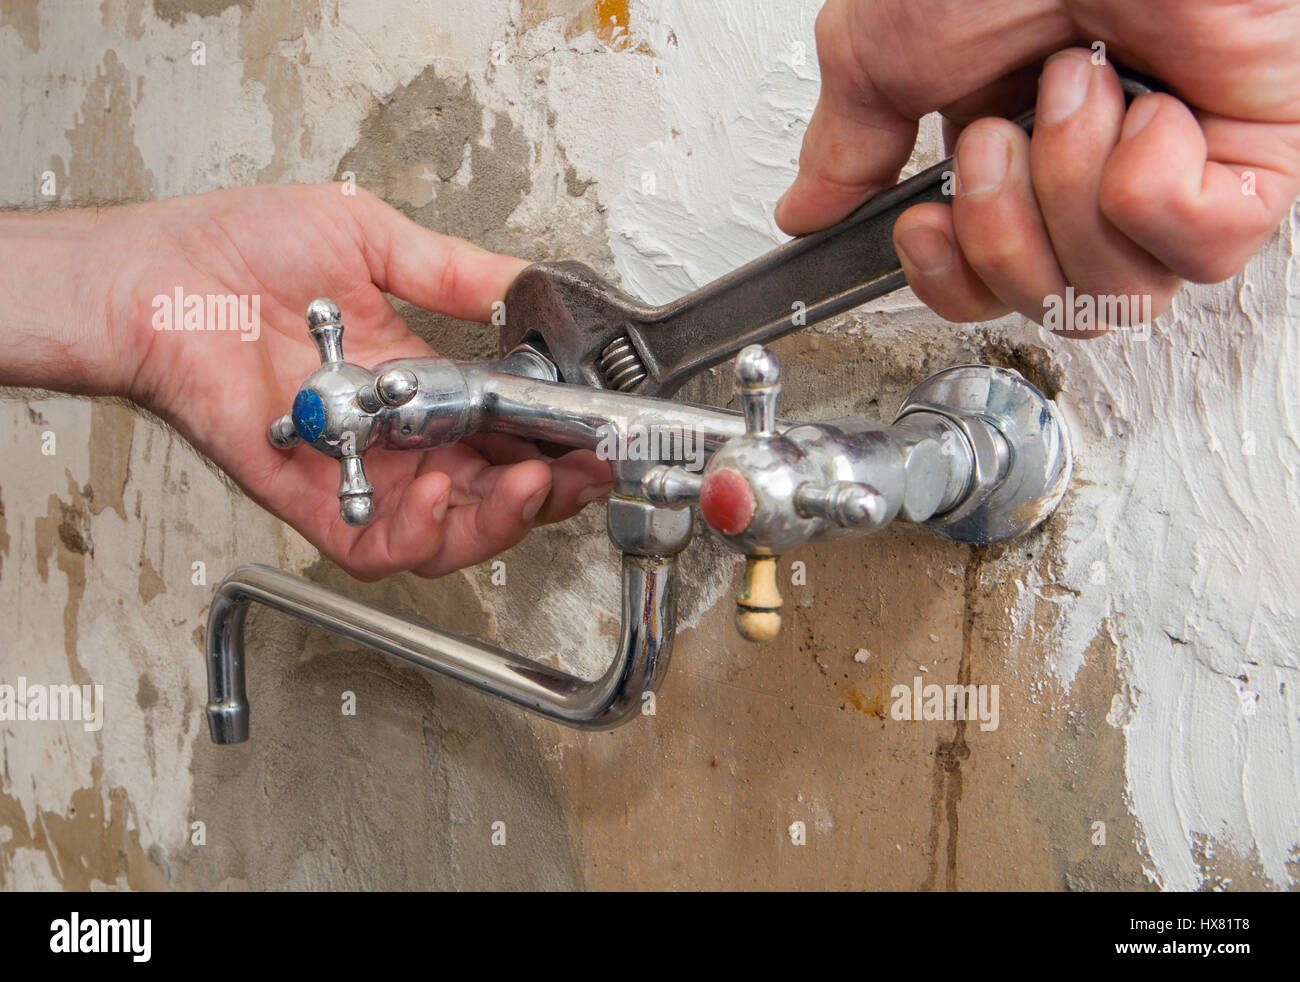 Fix a leaking tap, close-up of hands plumbing unscrew connecting nut wall faucet using an adjustable wrench. Stock Photo